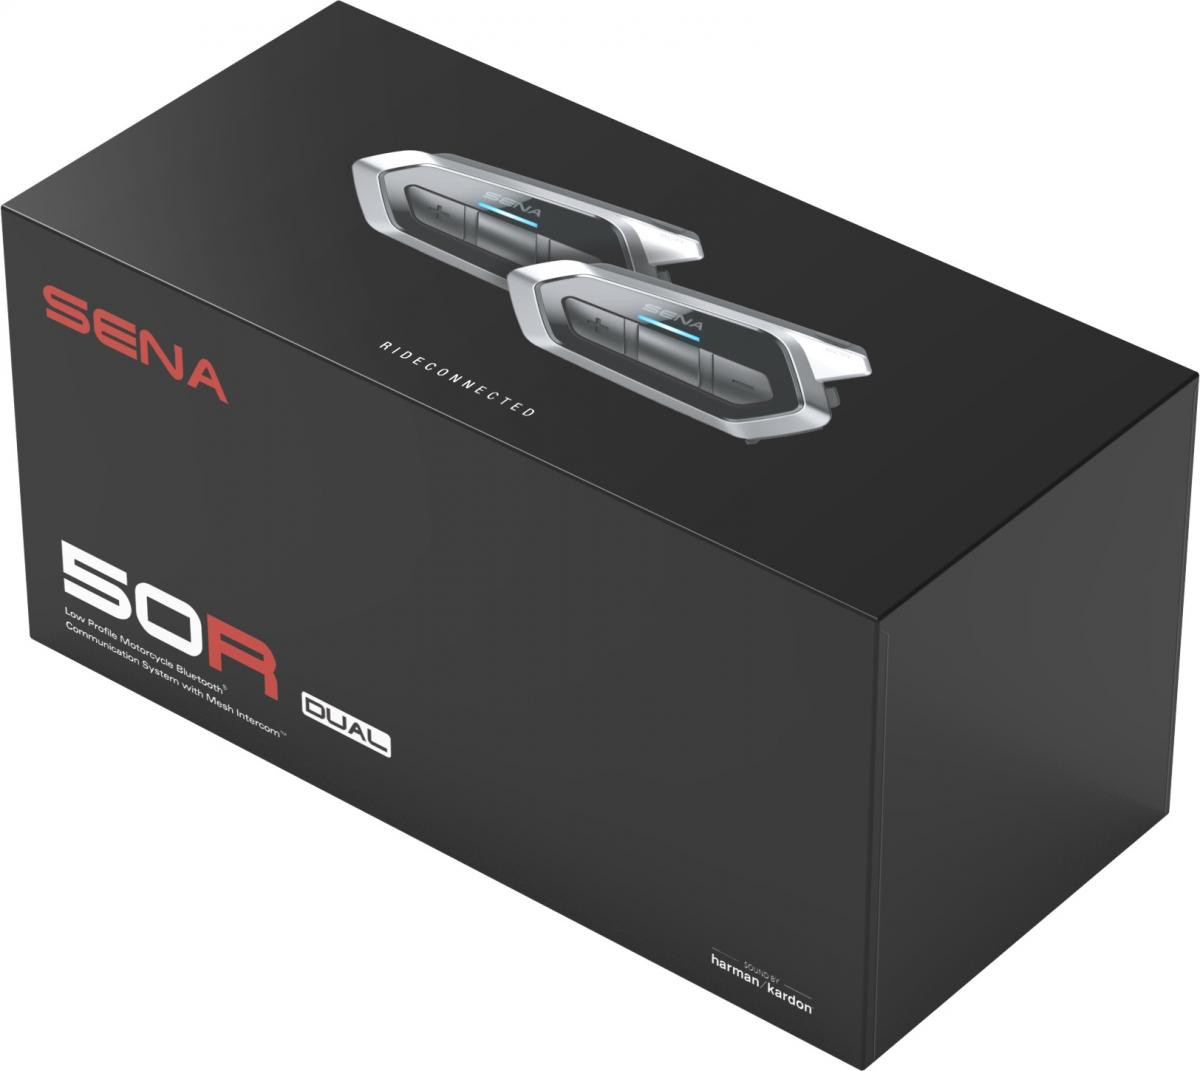 Sena 50R Dual Pack Low Profile Motorcycle Bluetooth / Mesh Communication System with SOUND BY Harman Kardon Speakers and Mic